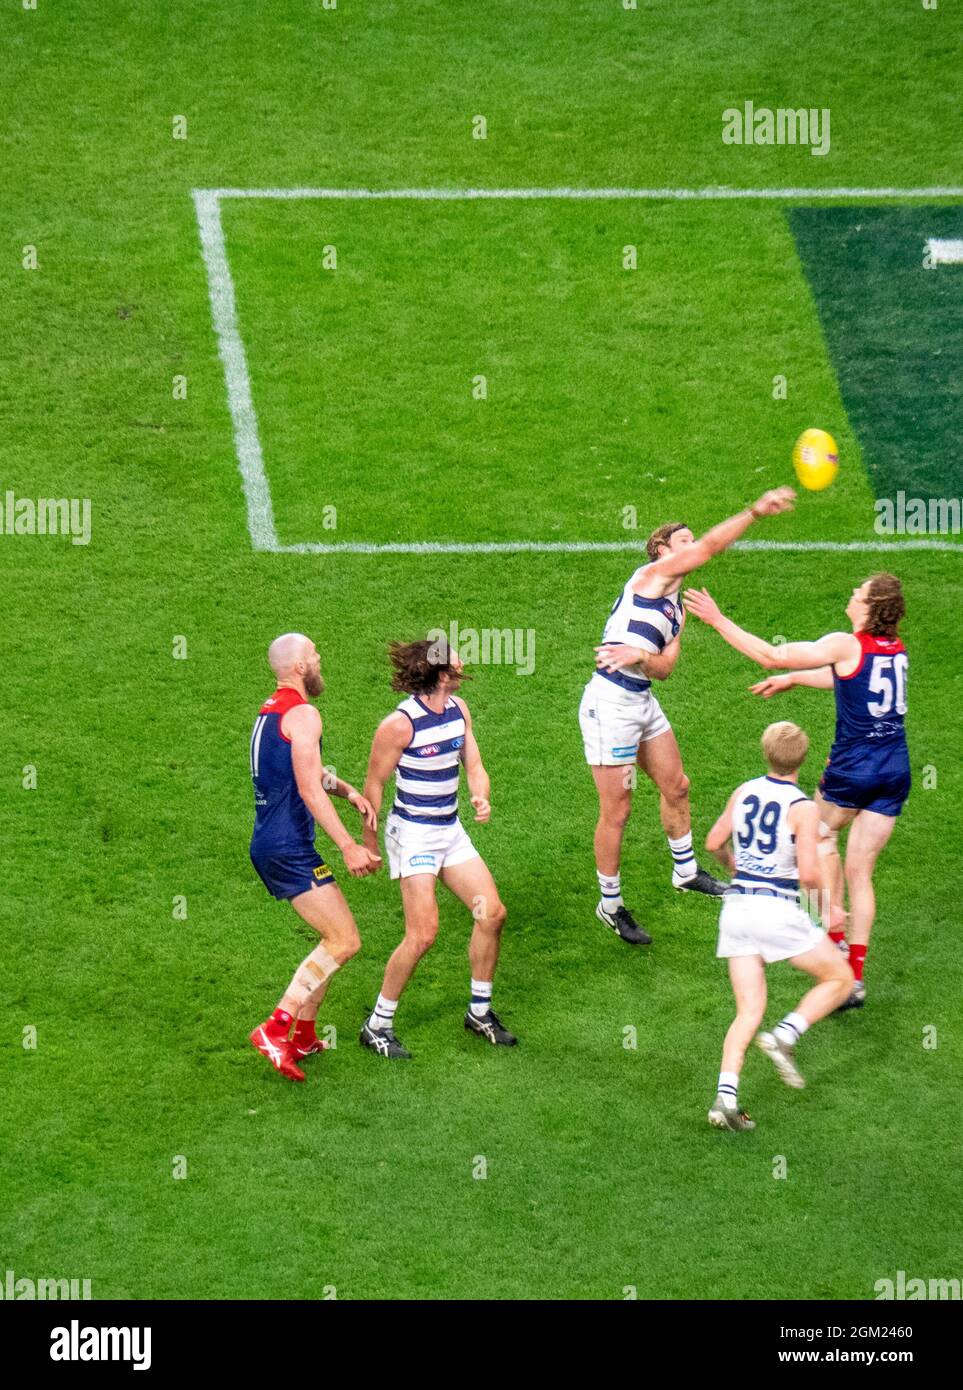 2021 AFL Preliminary Final Aussie rules football game between Melbourne and Geelong football clubs at Optus Stadium Perth Western Australia. Stock Photo